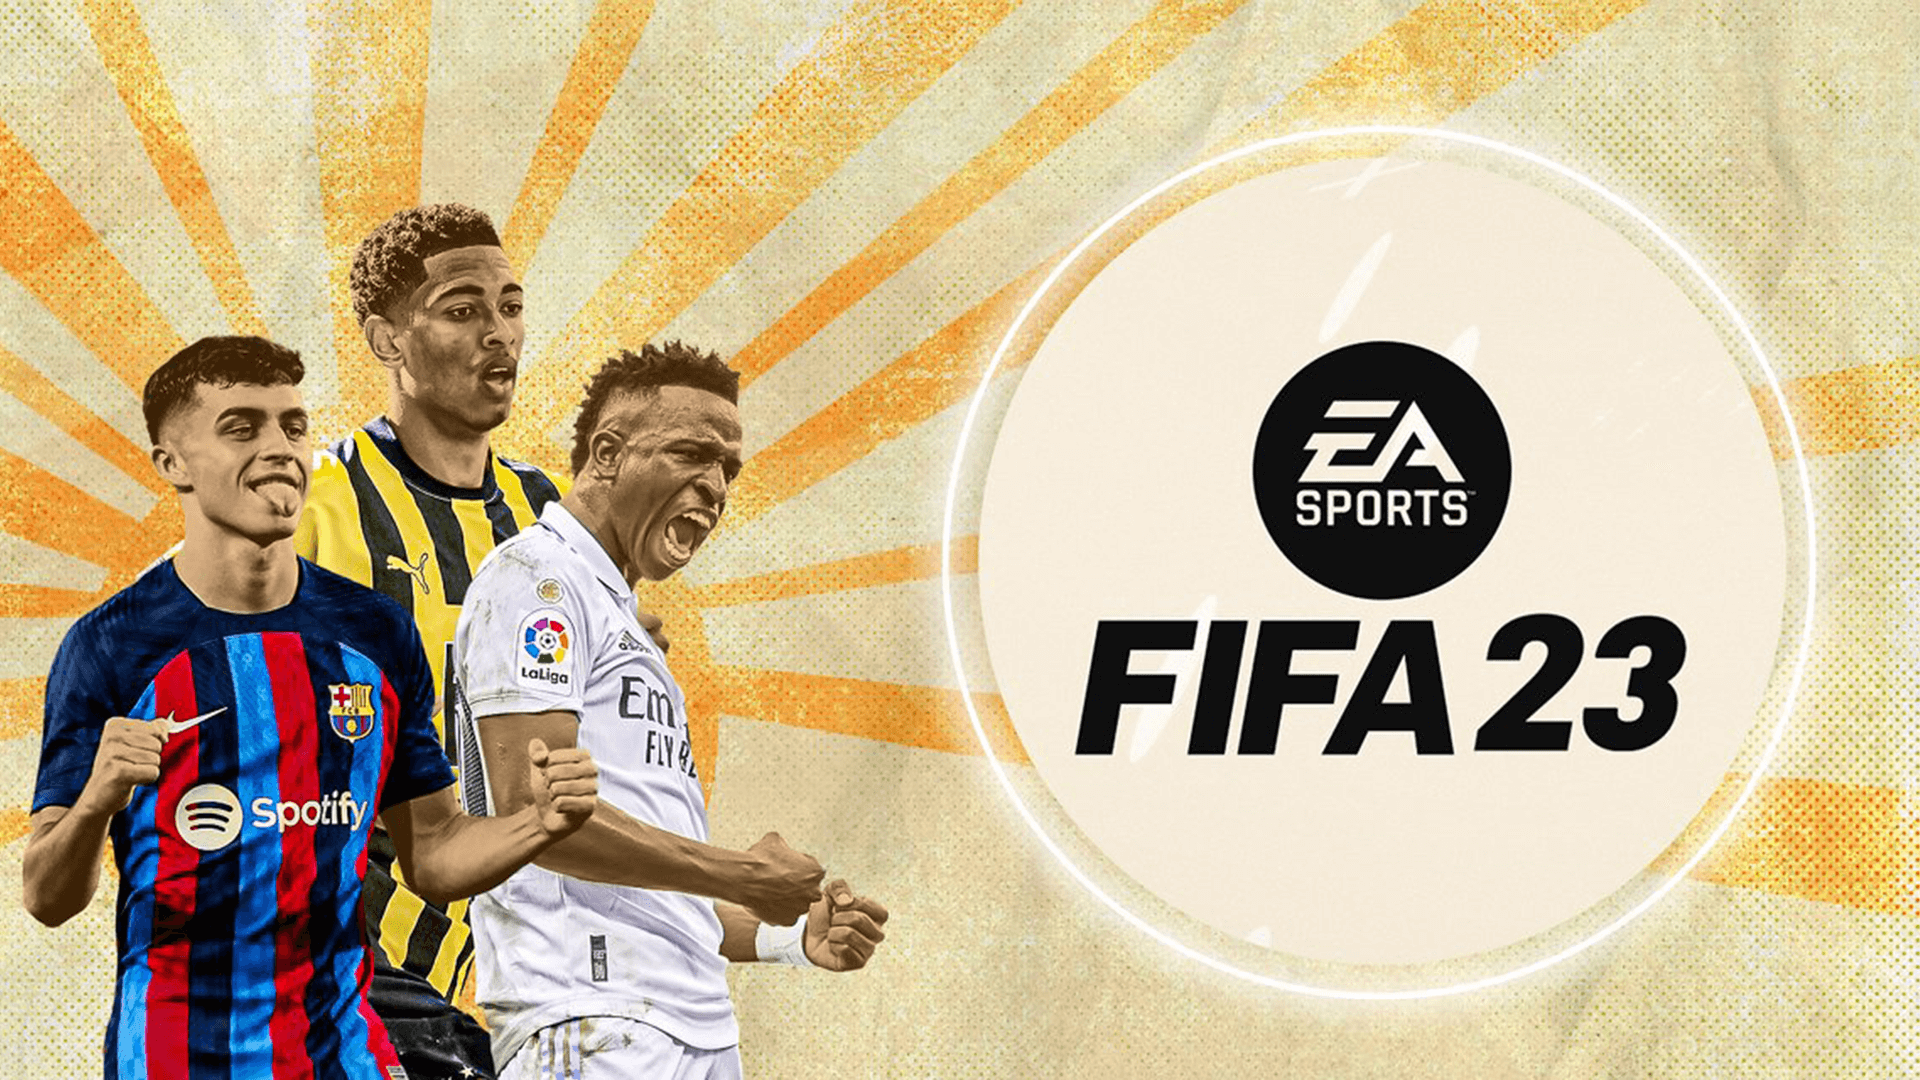 How to start with esports betting on FIFA 23?